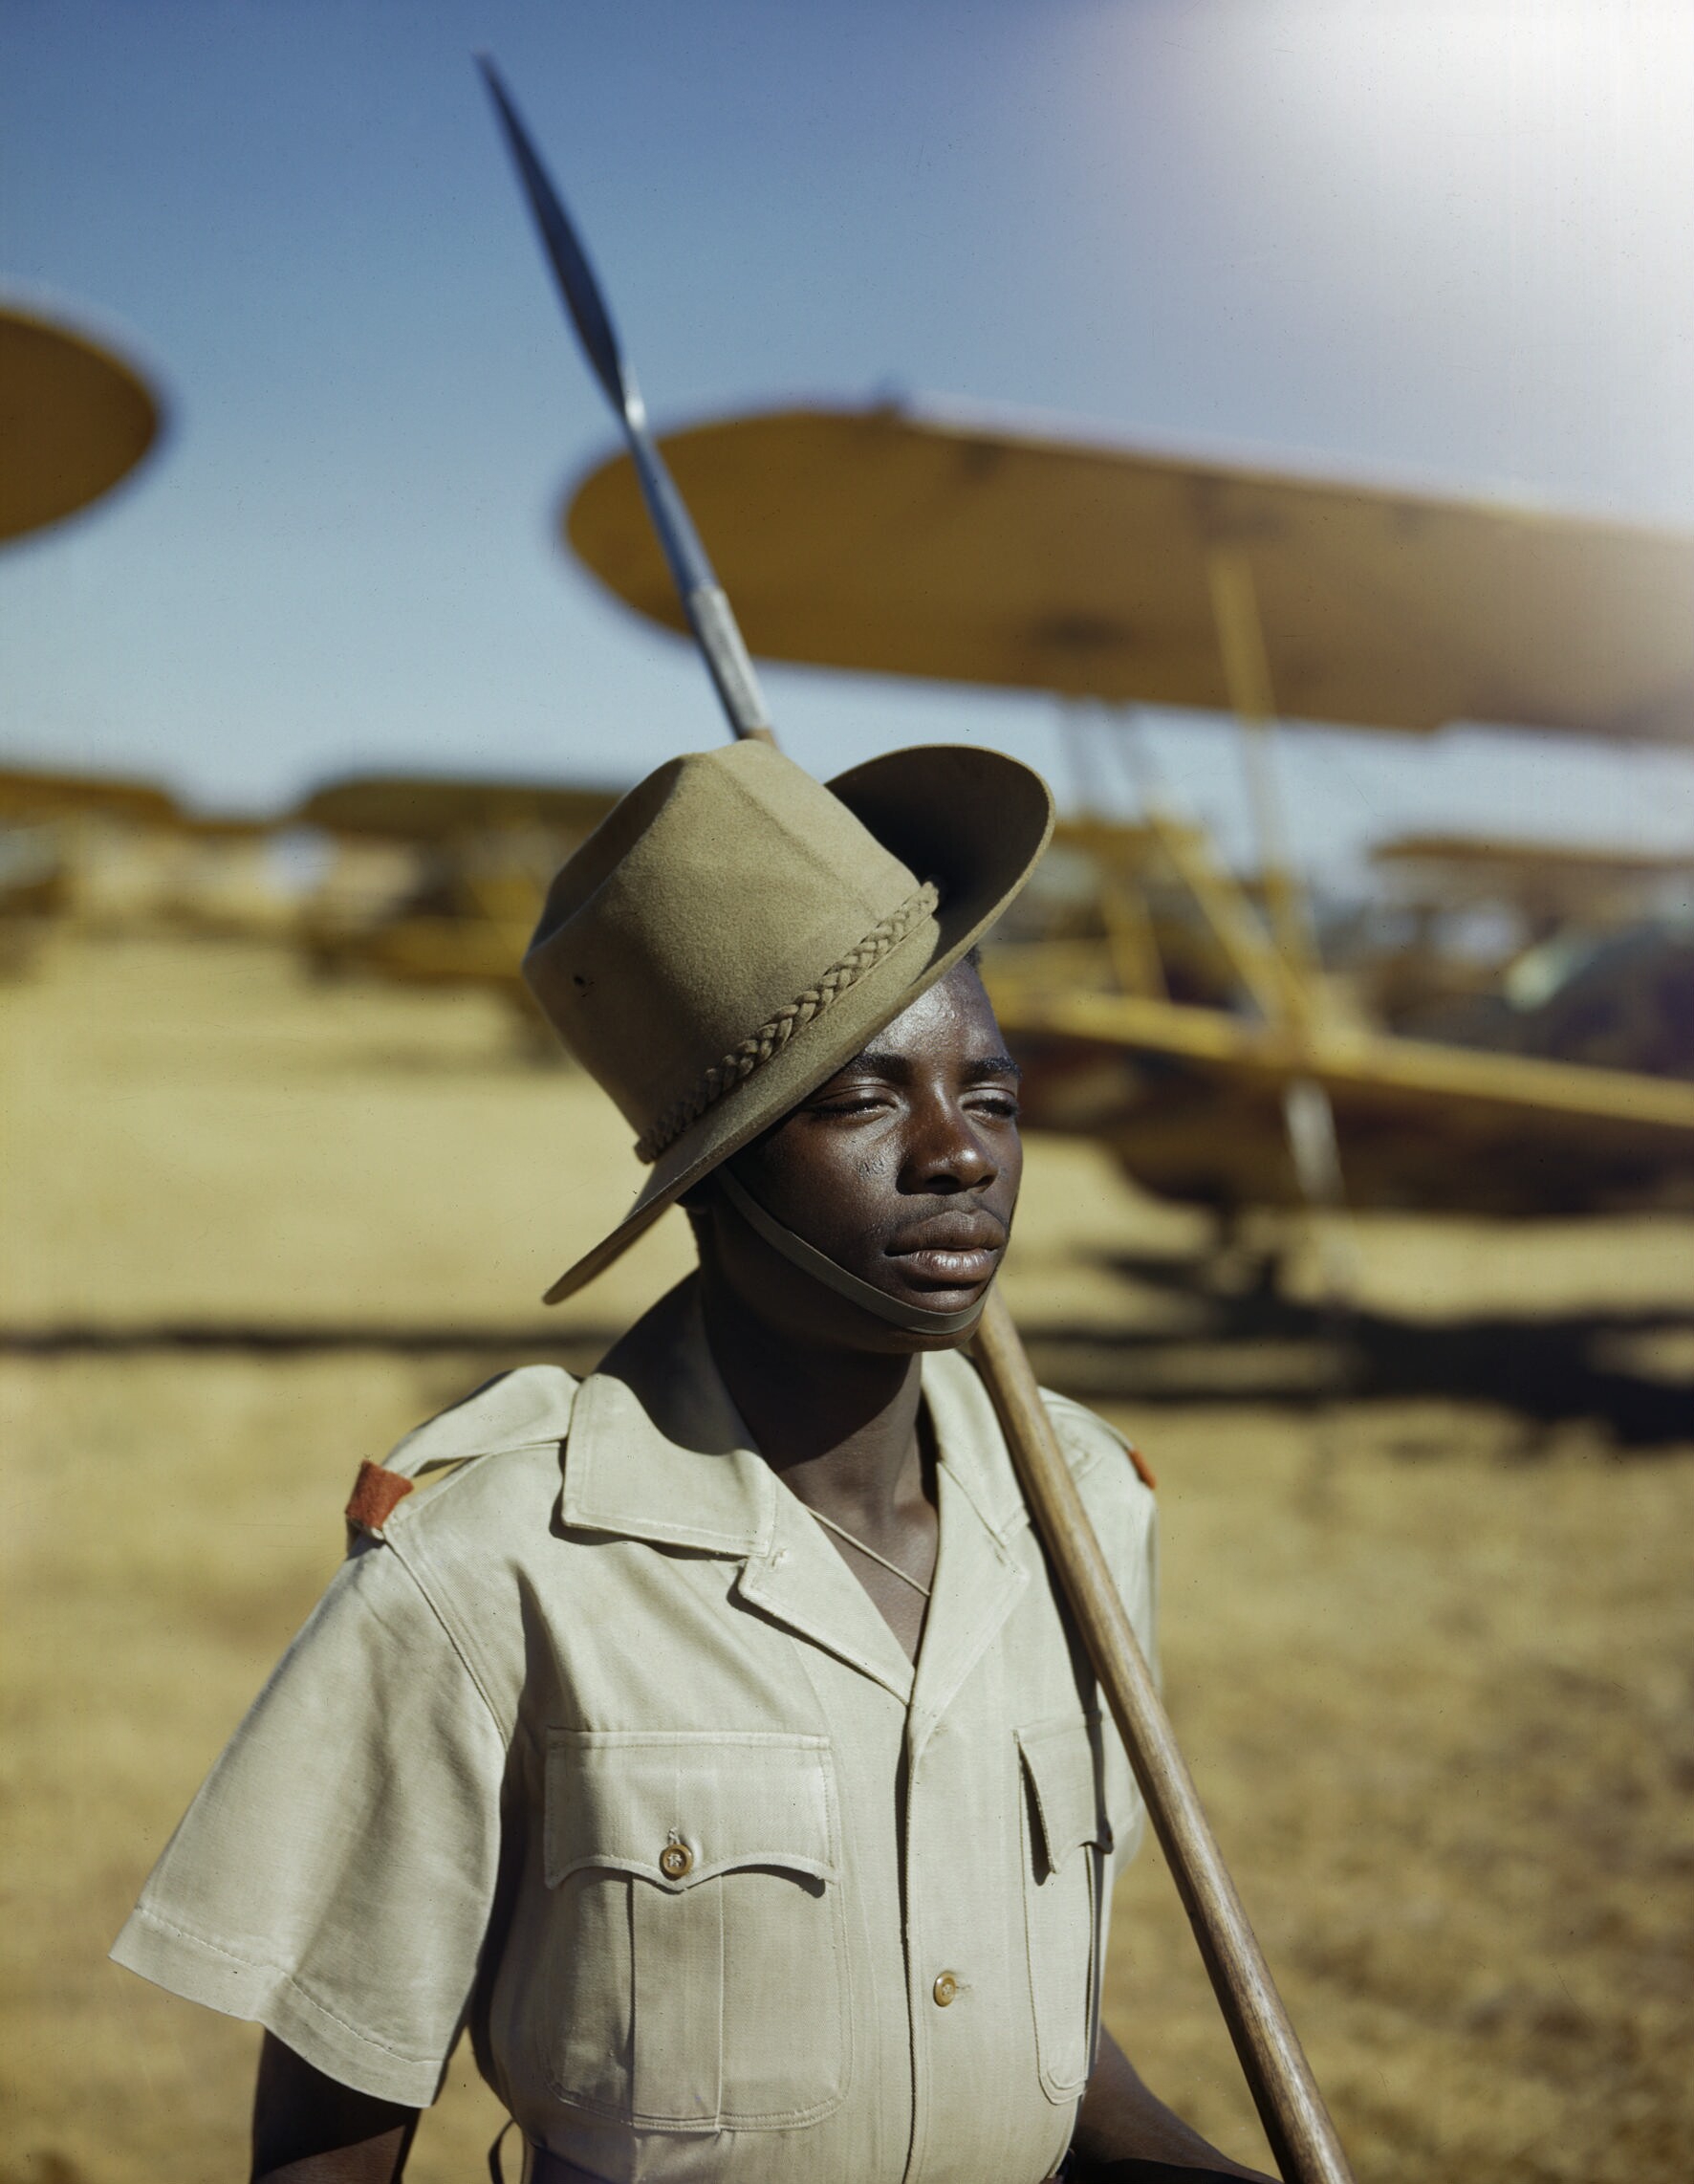 https://upload.wikimedia.org/wikipedia/commons/6/63/An_African_soldier_or_%27Askari%27_on_guard_duty_at_No._23_Air_School_at_Waterkloof%2C_Pretoria%2C_South_Africa%2C_January_1943._TR1262.jpg